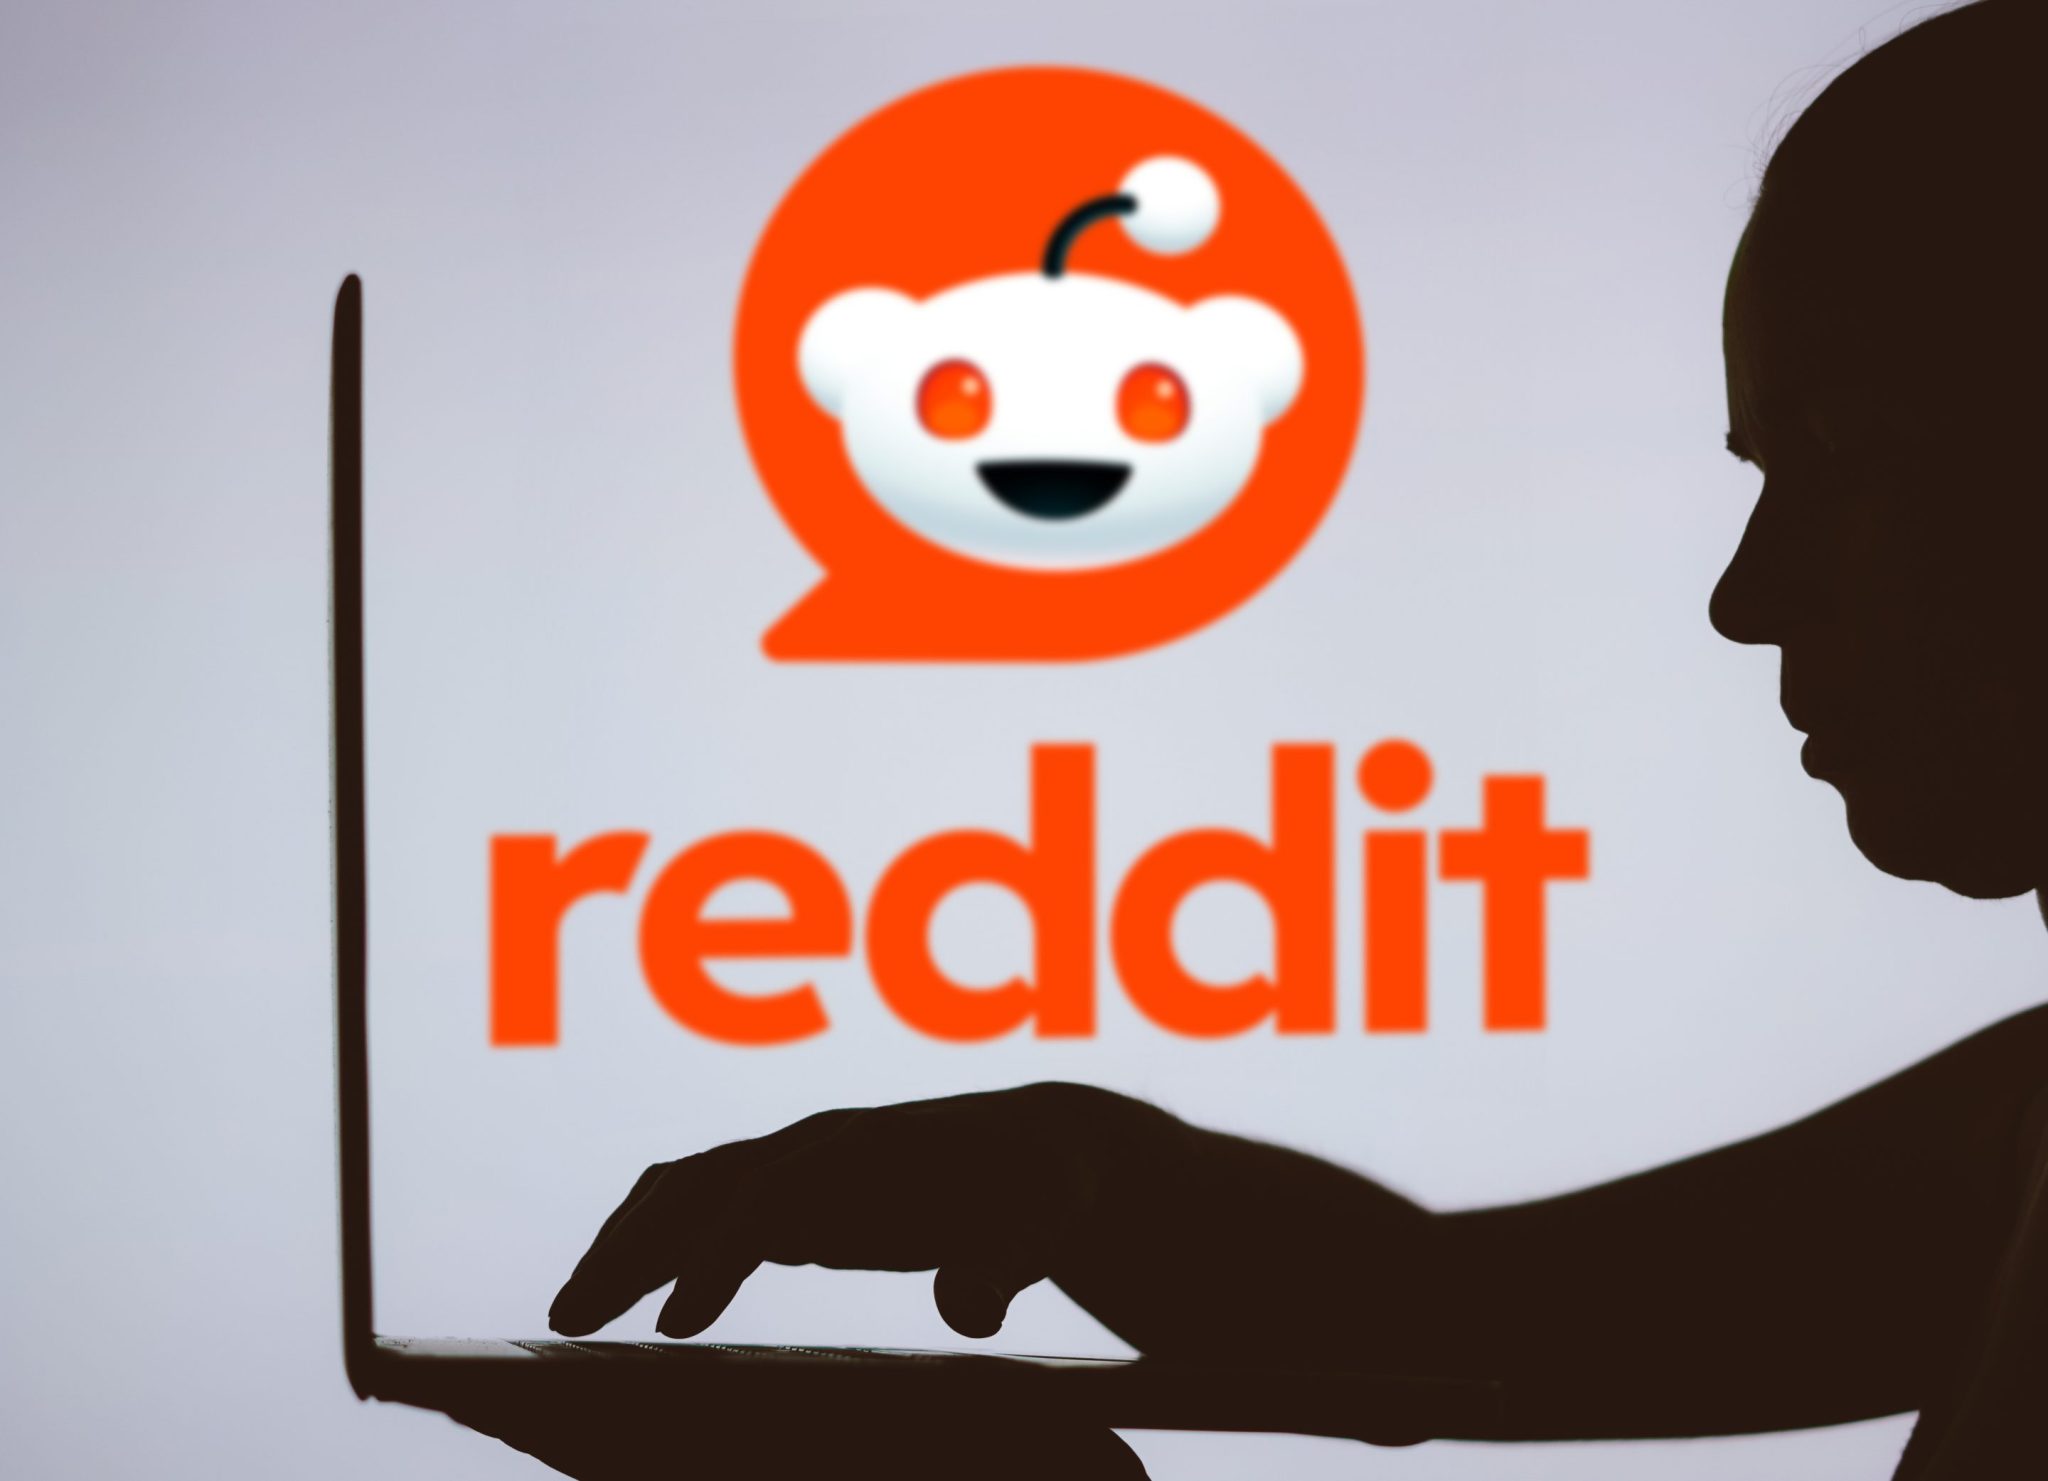 Reddit eyes a $6.5 billion valuation for its planned IPO—well short of its pandemic-era peak